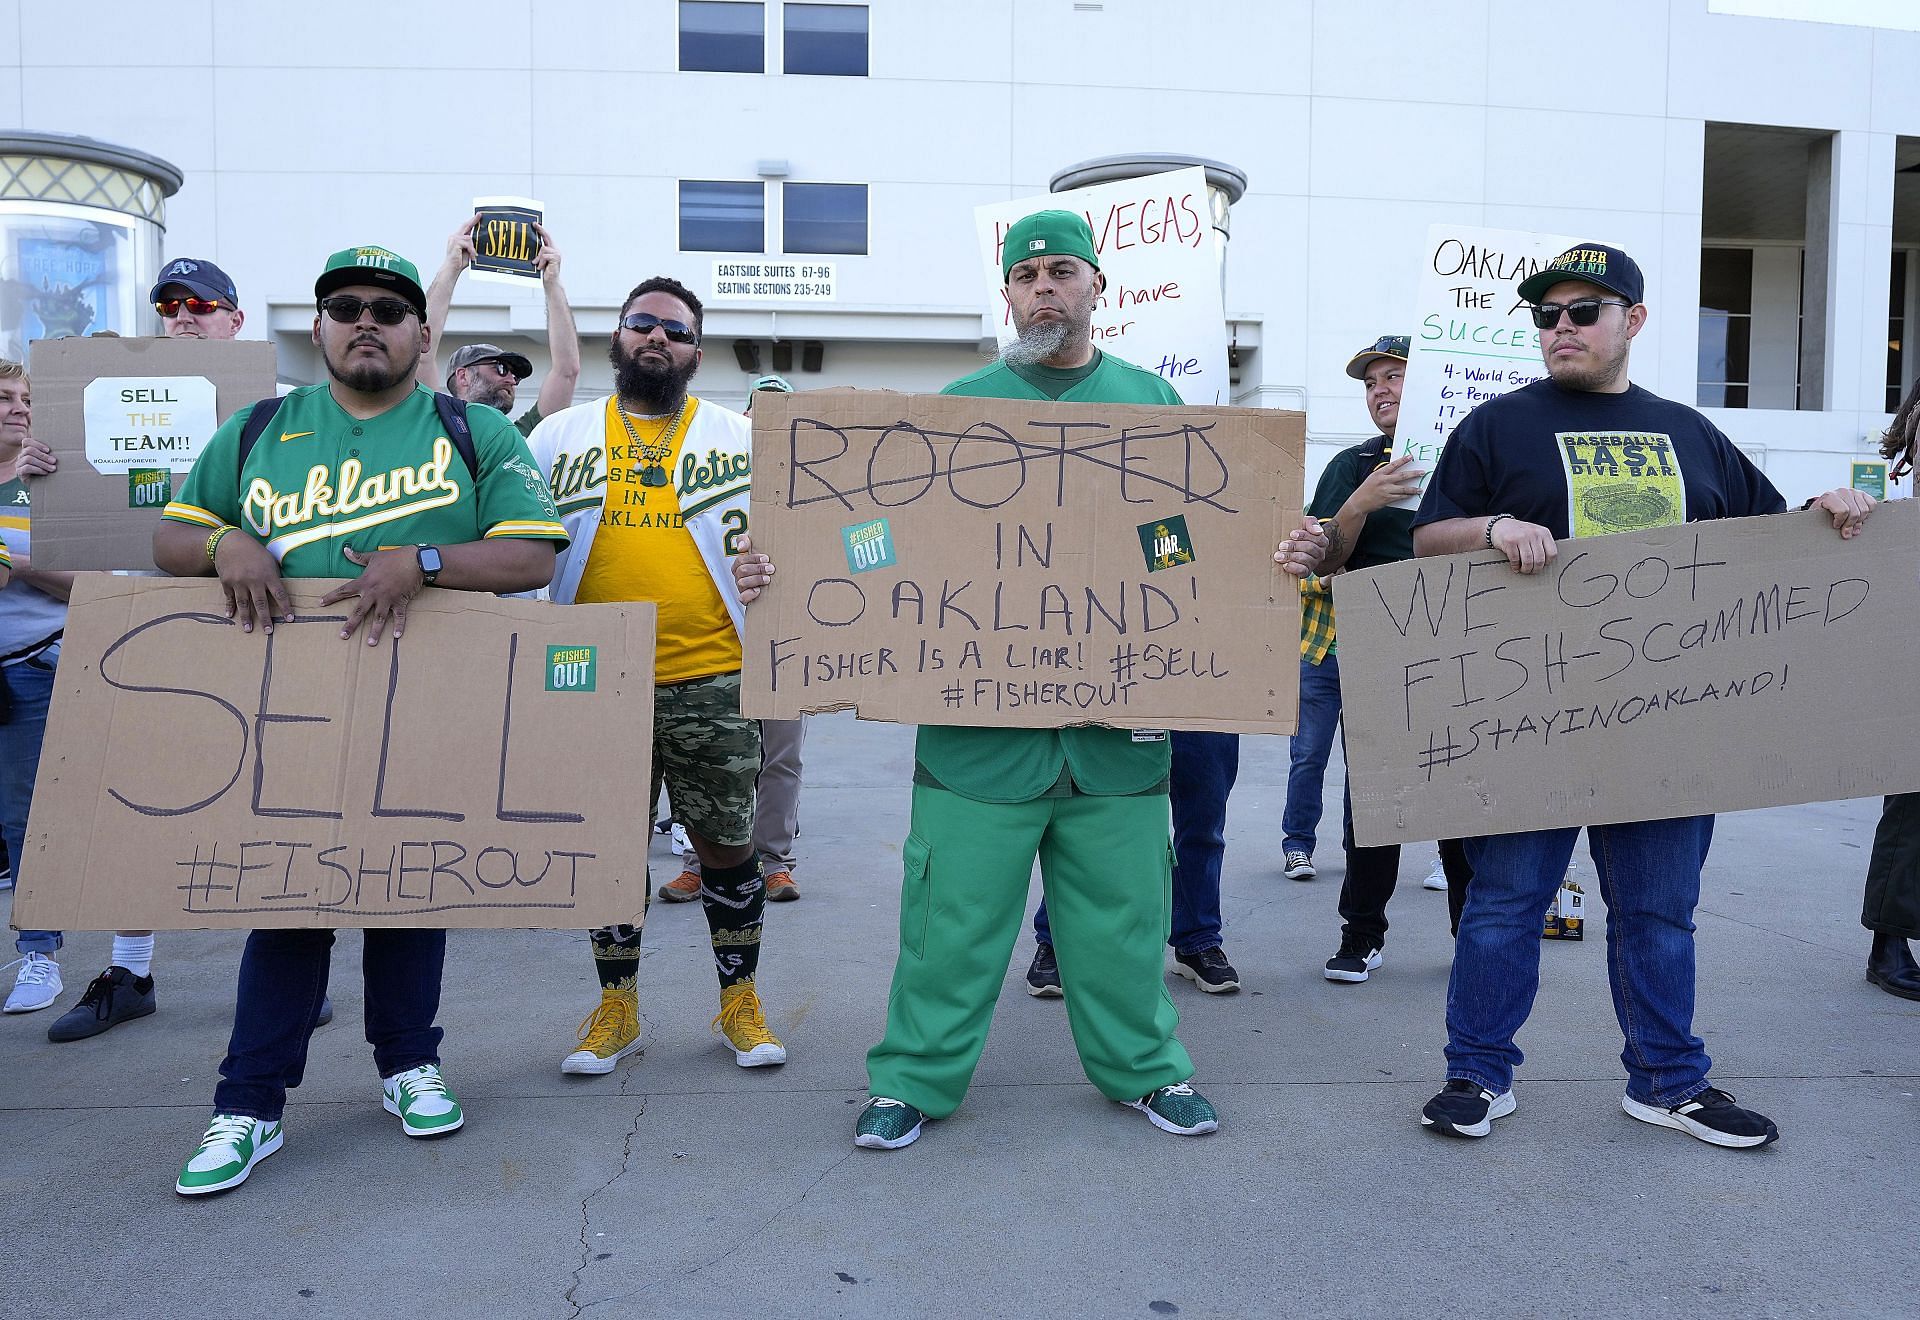 MLB News: Watch A's Fans Hilariously Troll the Astros on Opening Day in  Oakland